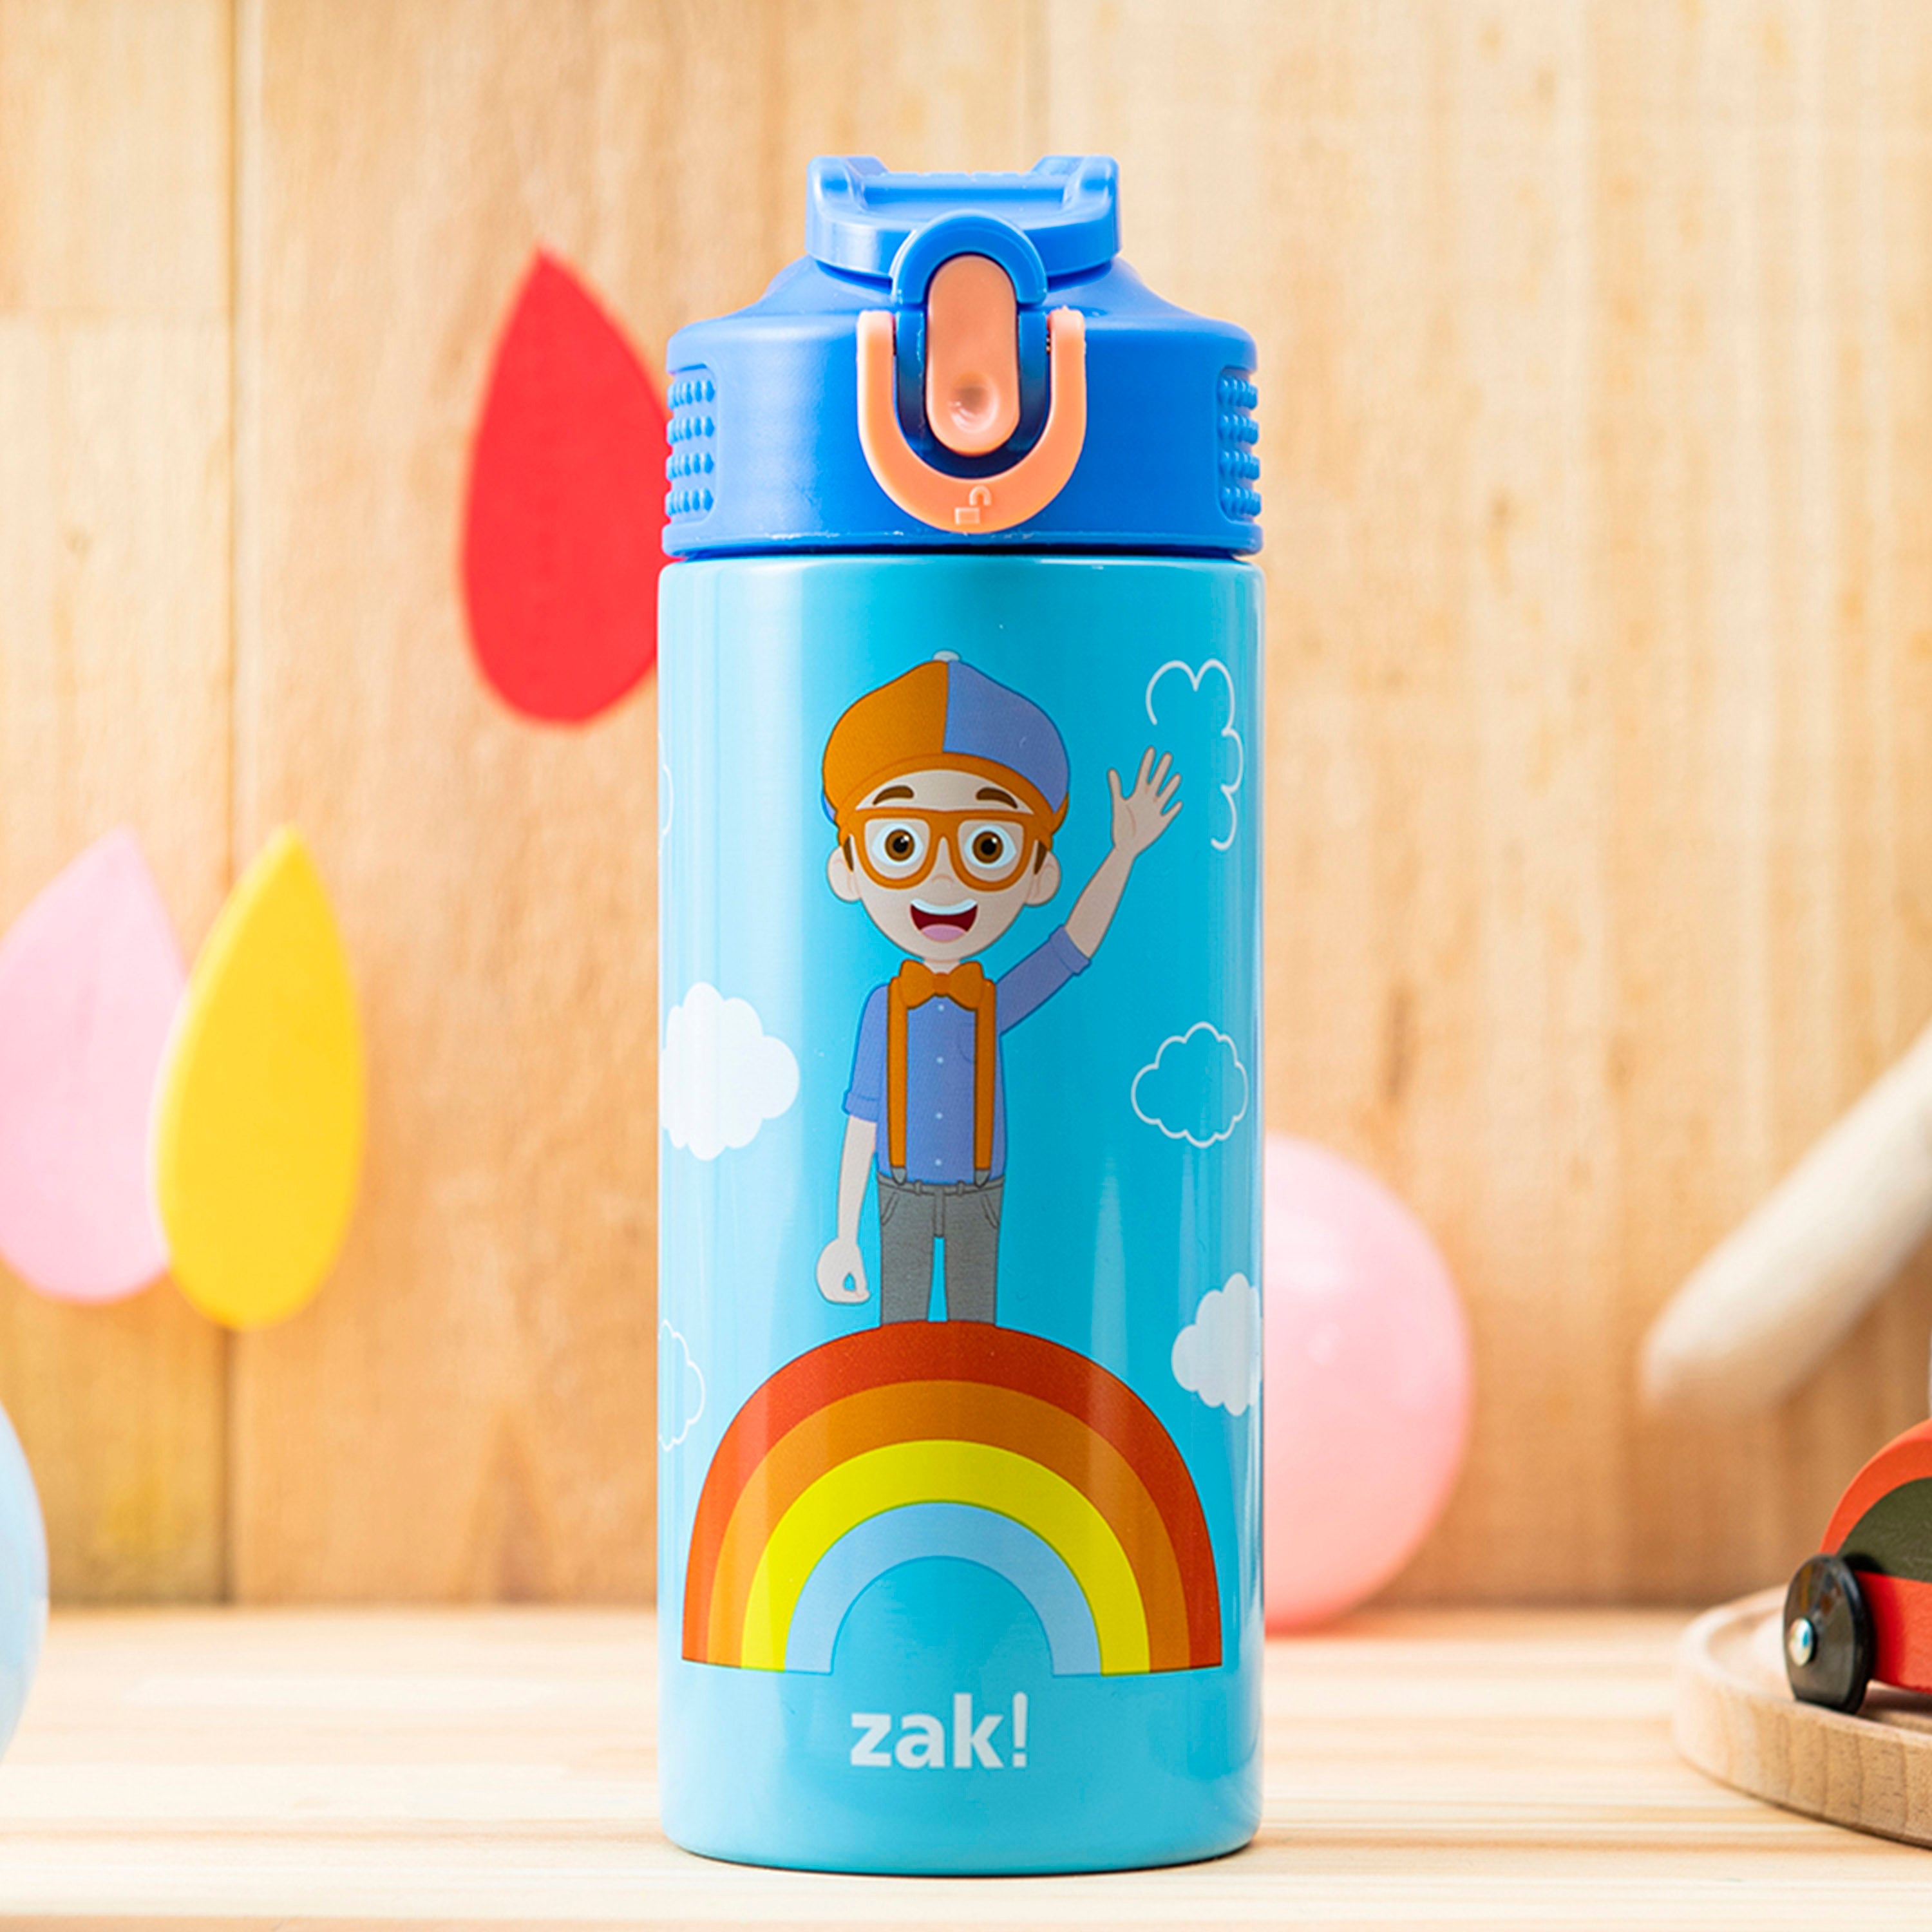 zak! Bluey - Stainless Steel Vacuum Insulated Water Bottle - 14 oz -  Durable & Leak Proof - Flip-Up Straw Spout & Built-In Carrying Loop - BPA  Free